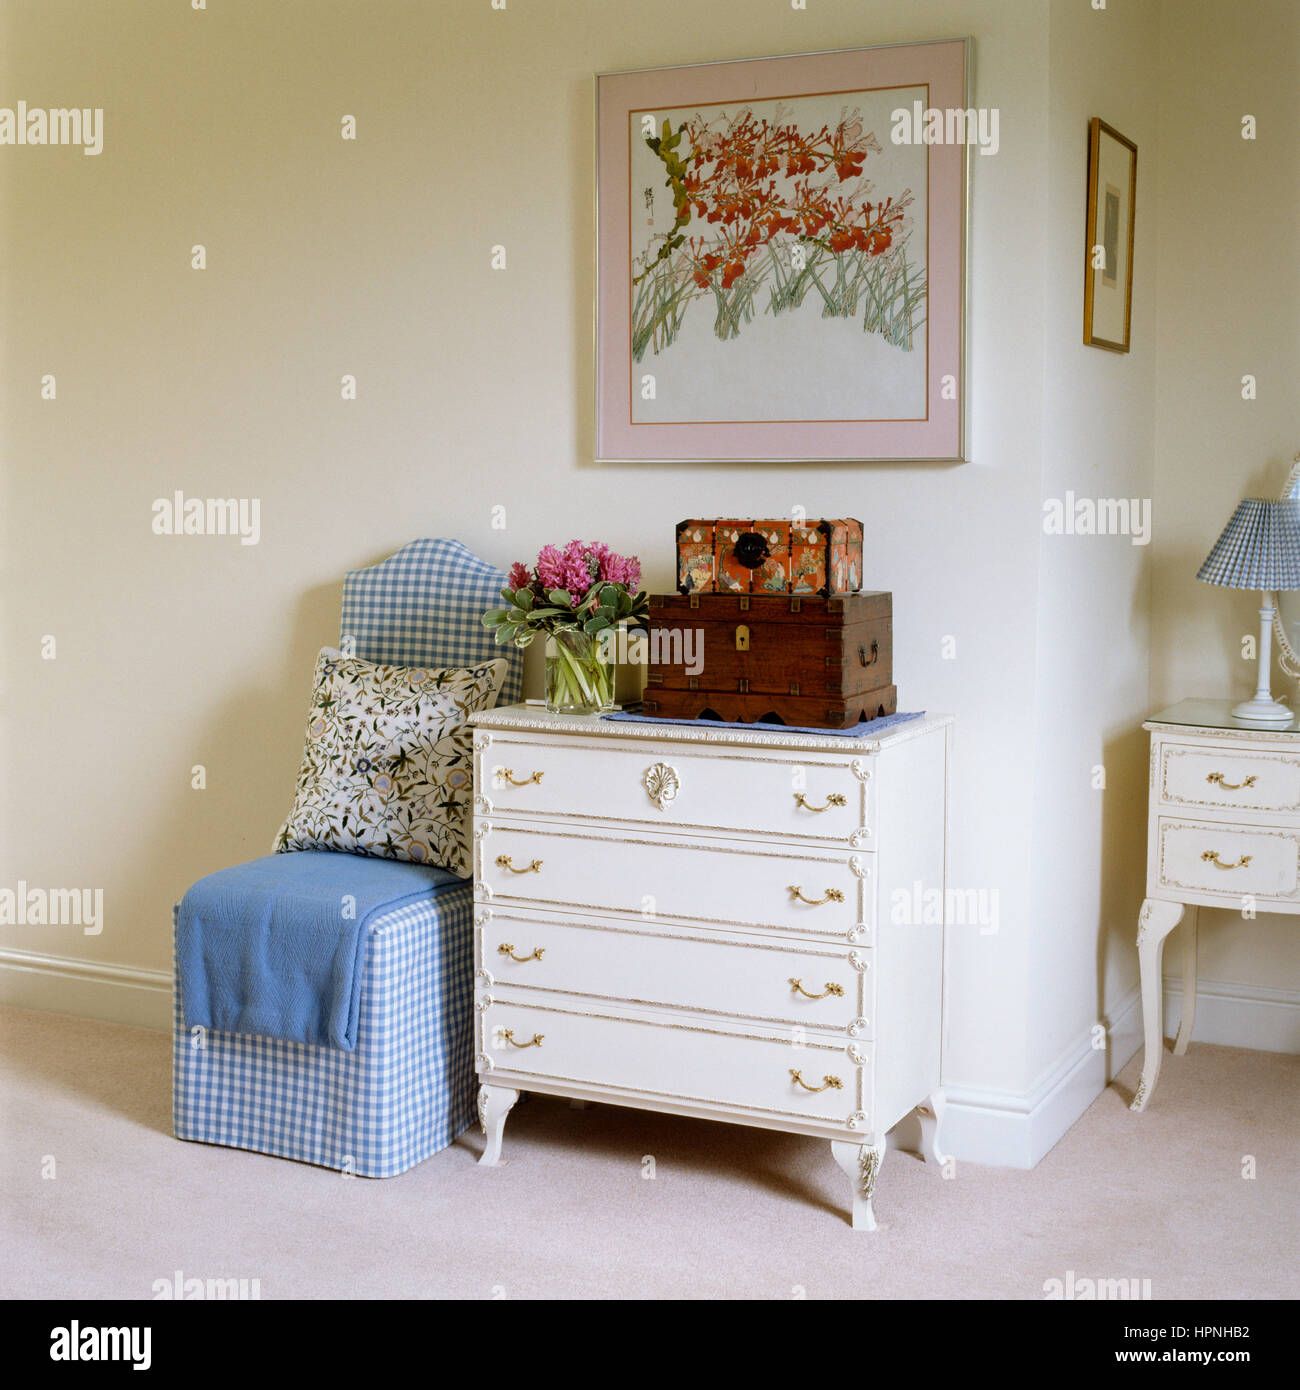 A gingham chair and classic style drawers. Stock Photo